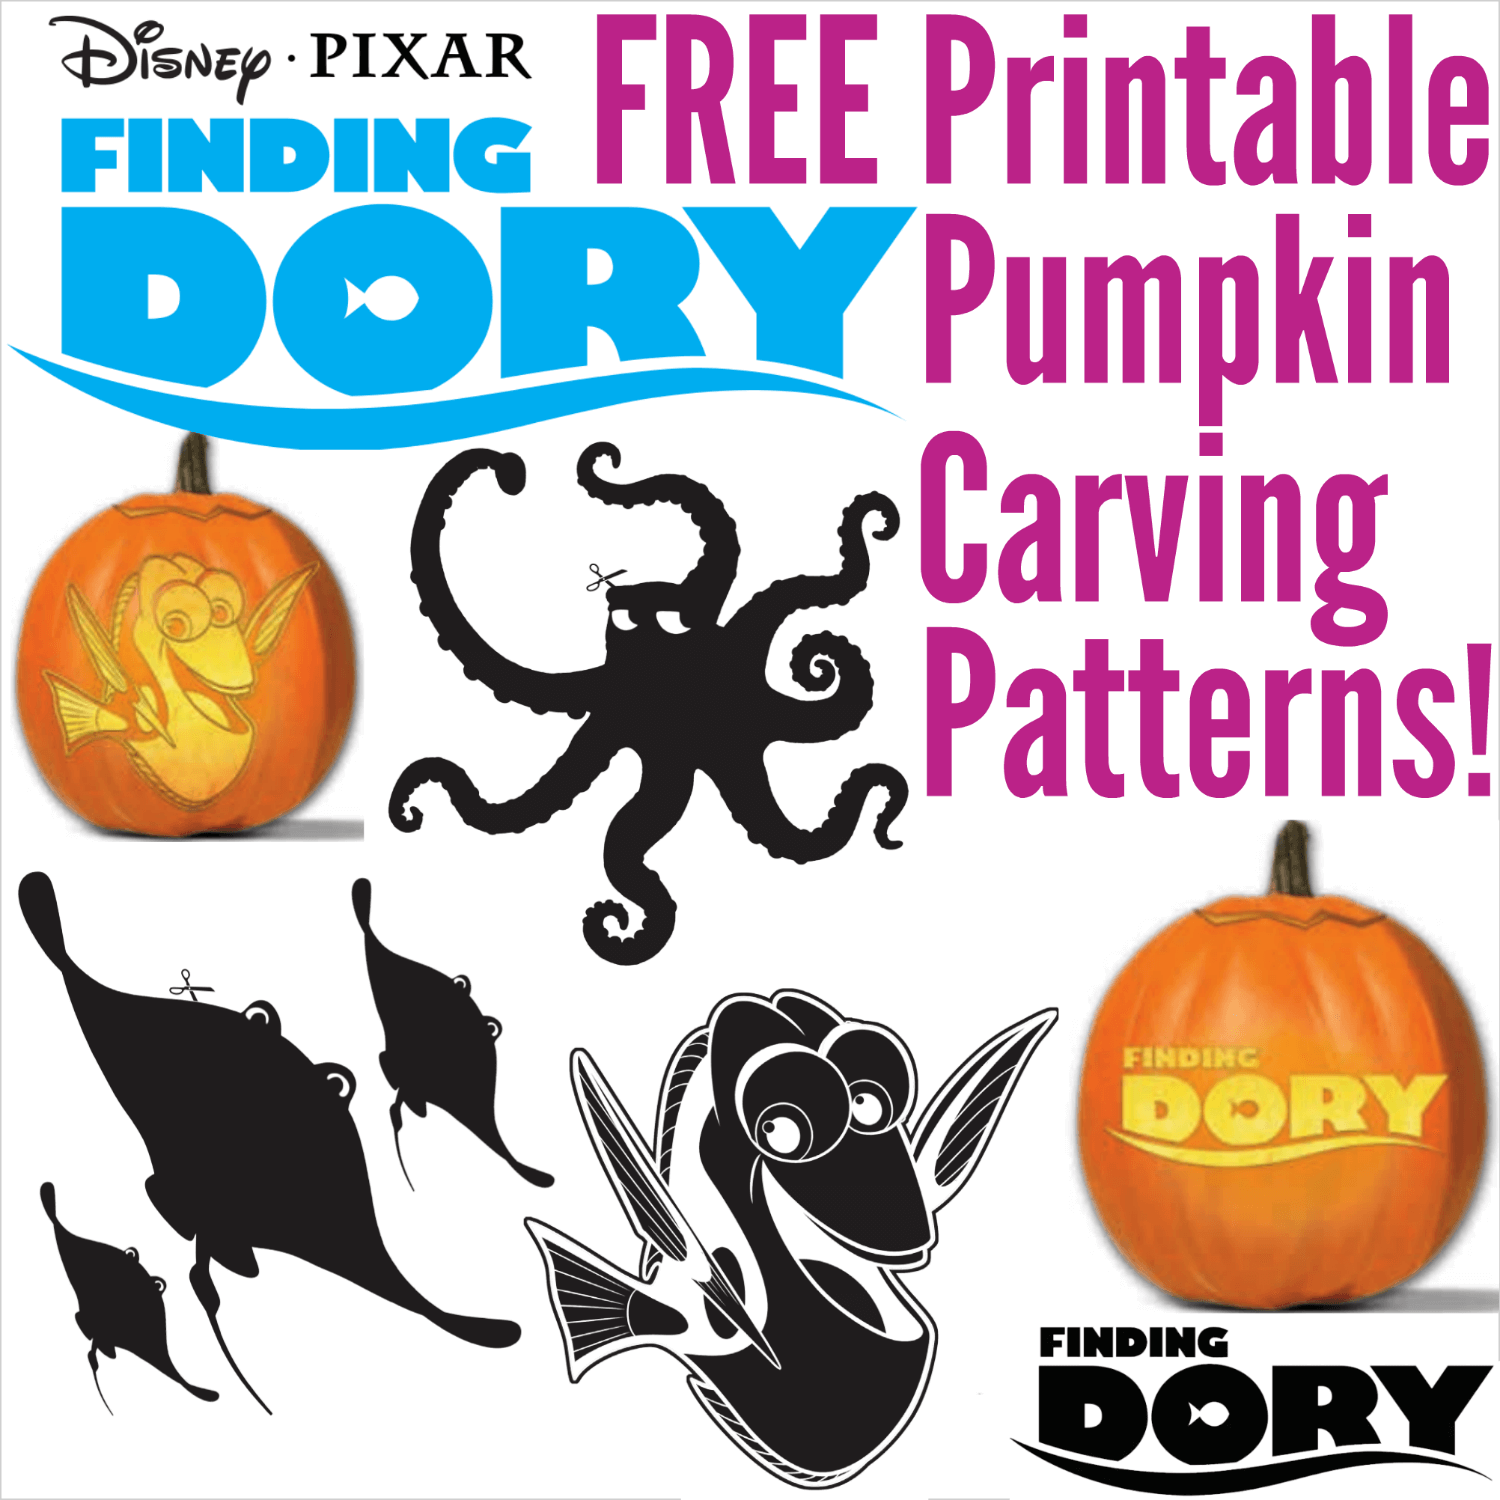 Free finding dory pumpkin carving patterns to print